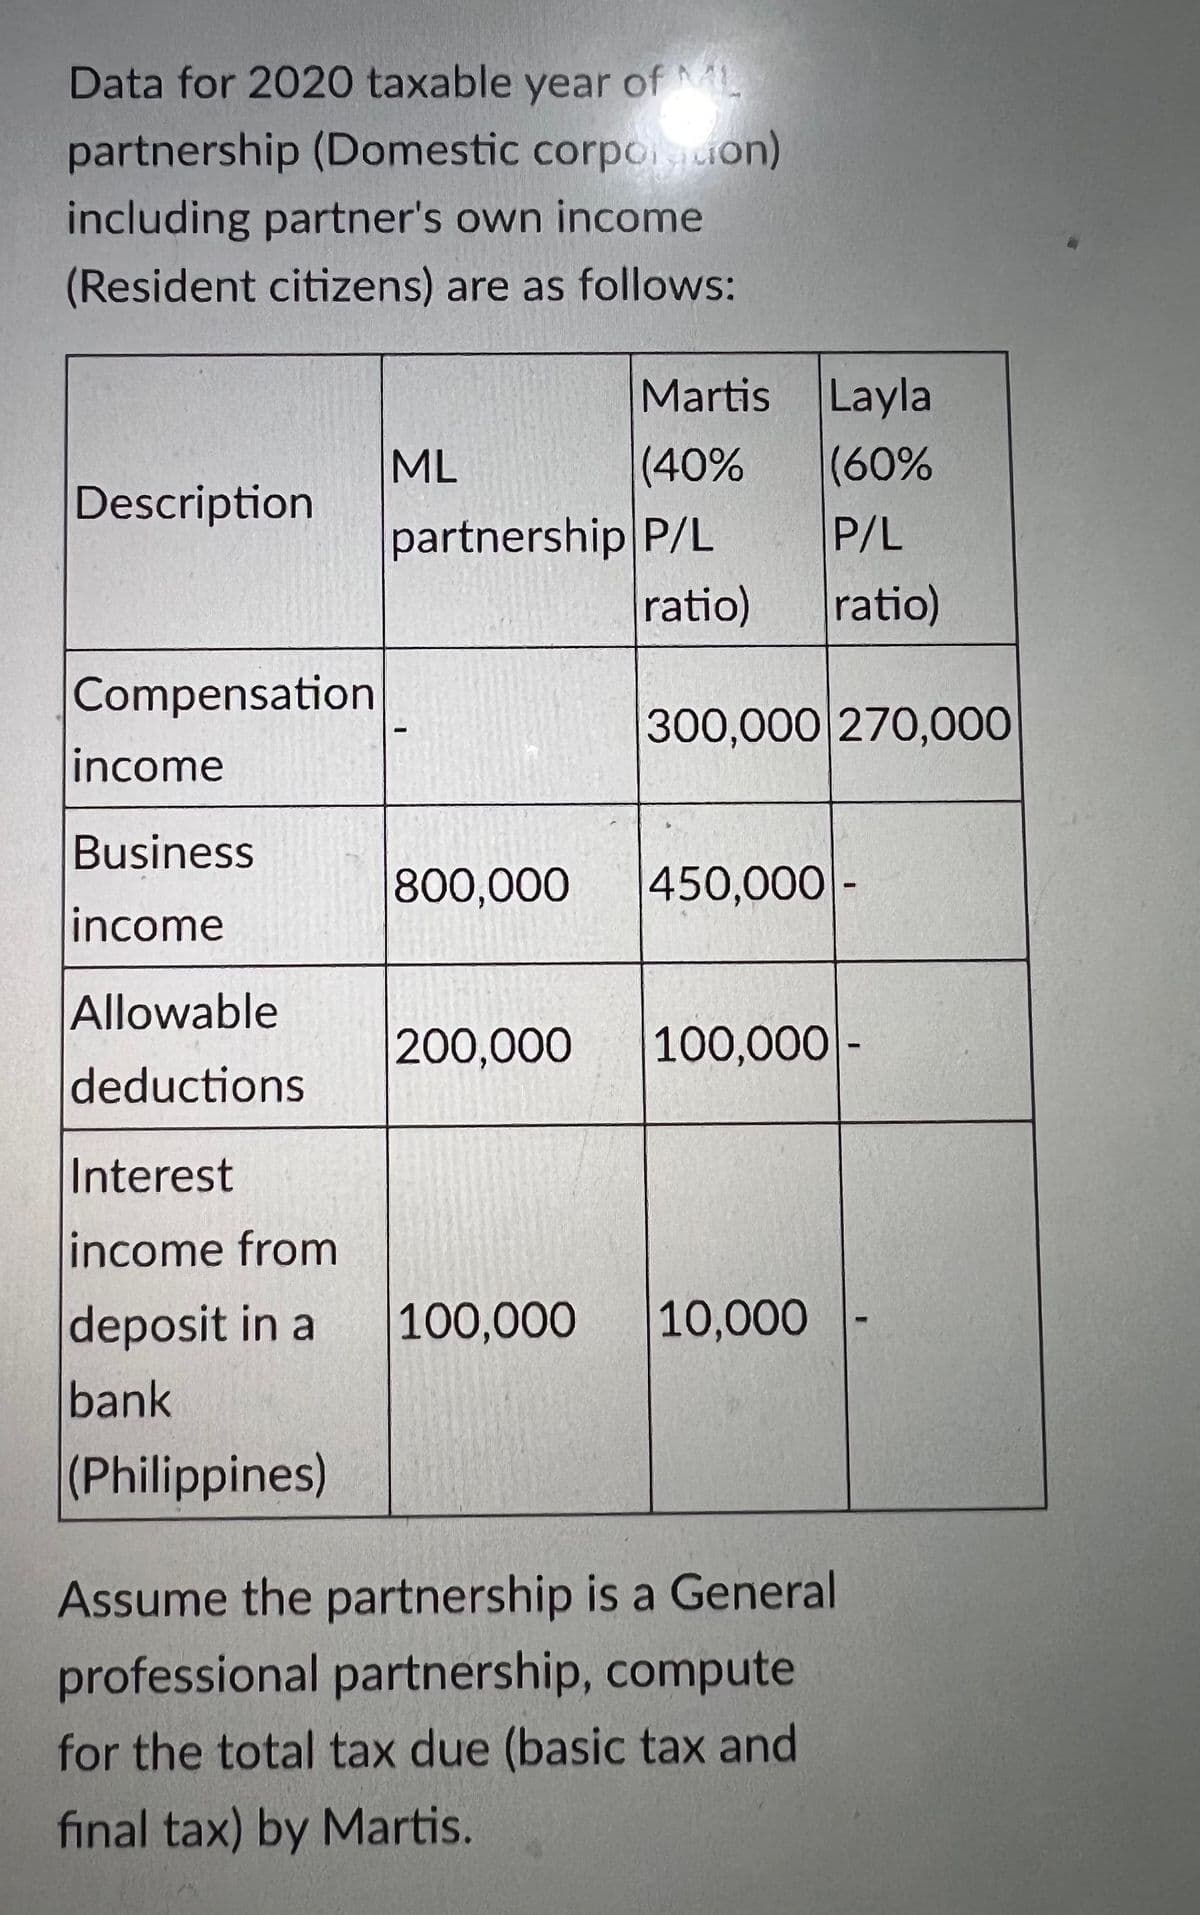 Data for 2020 taxable year of L
partnership (Domestic corpouon)
including partner's own income
(Resident citizens) are as follows:
Martis
Layla
ML
(40%
(60%
Description
partnership P/L
ratio)
P/L
ratio)
Compensation
300,000 270,000
income
Business
800,000
450,000|-
income
Allowable
200,000
100,000 -
deductions
Interest
income from
deposit in a
bank
100,000
10,000
(Philippines)
Assume the partnership is a General
professional partnership, compute
for the total tax due (basic tax and
final tax) by Martis.
